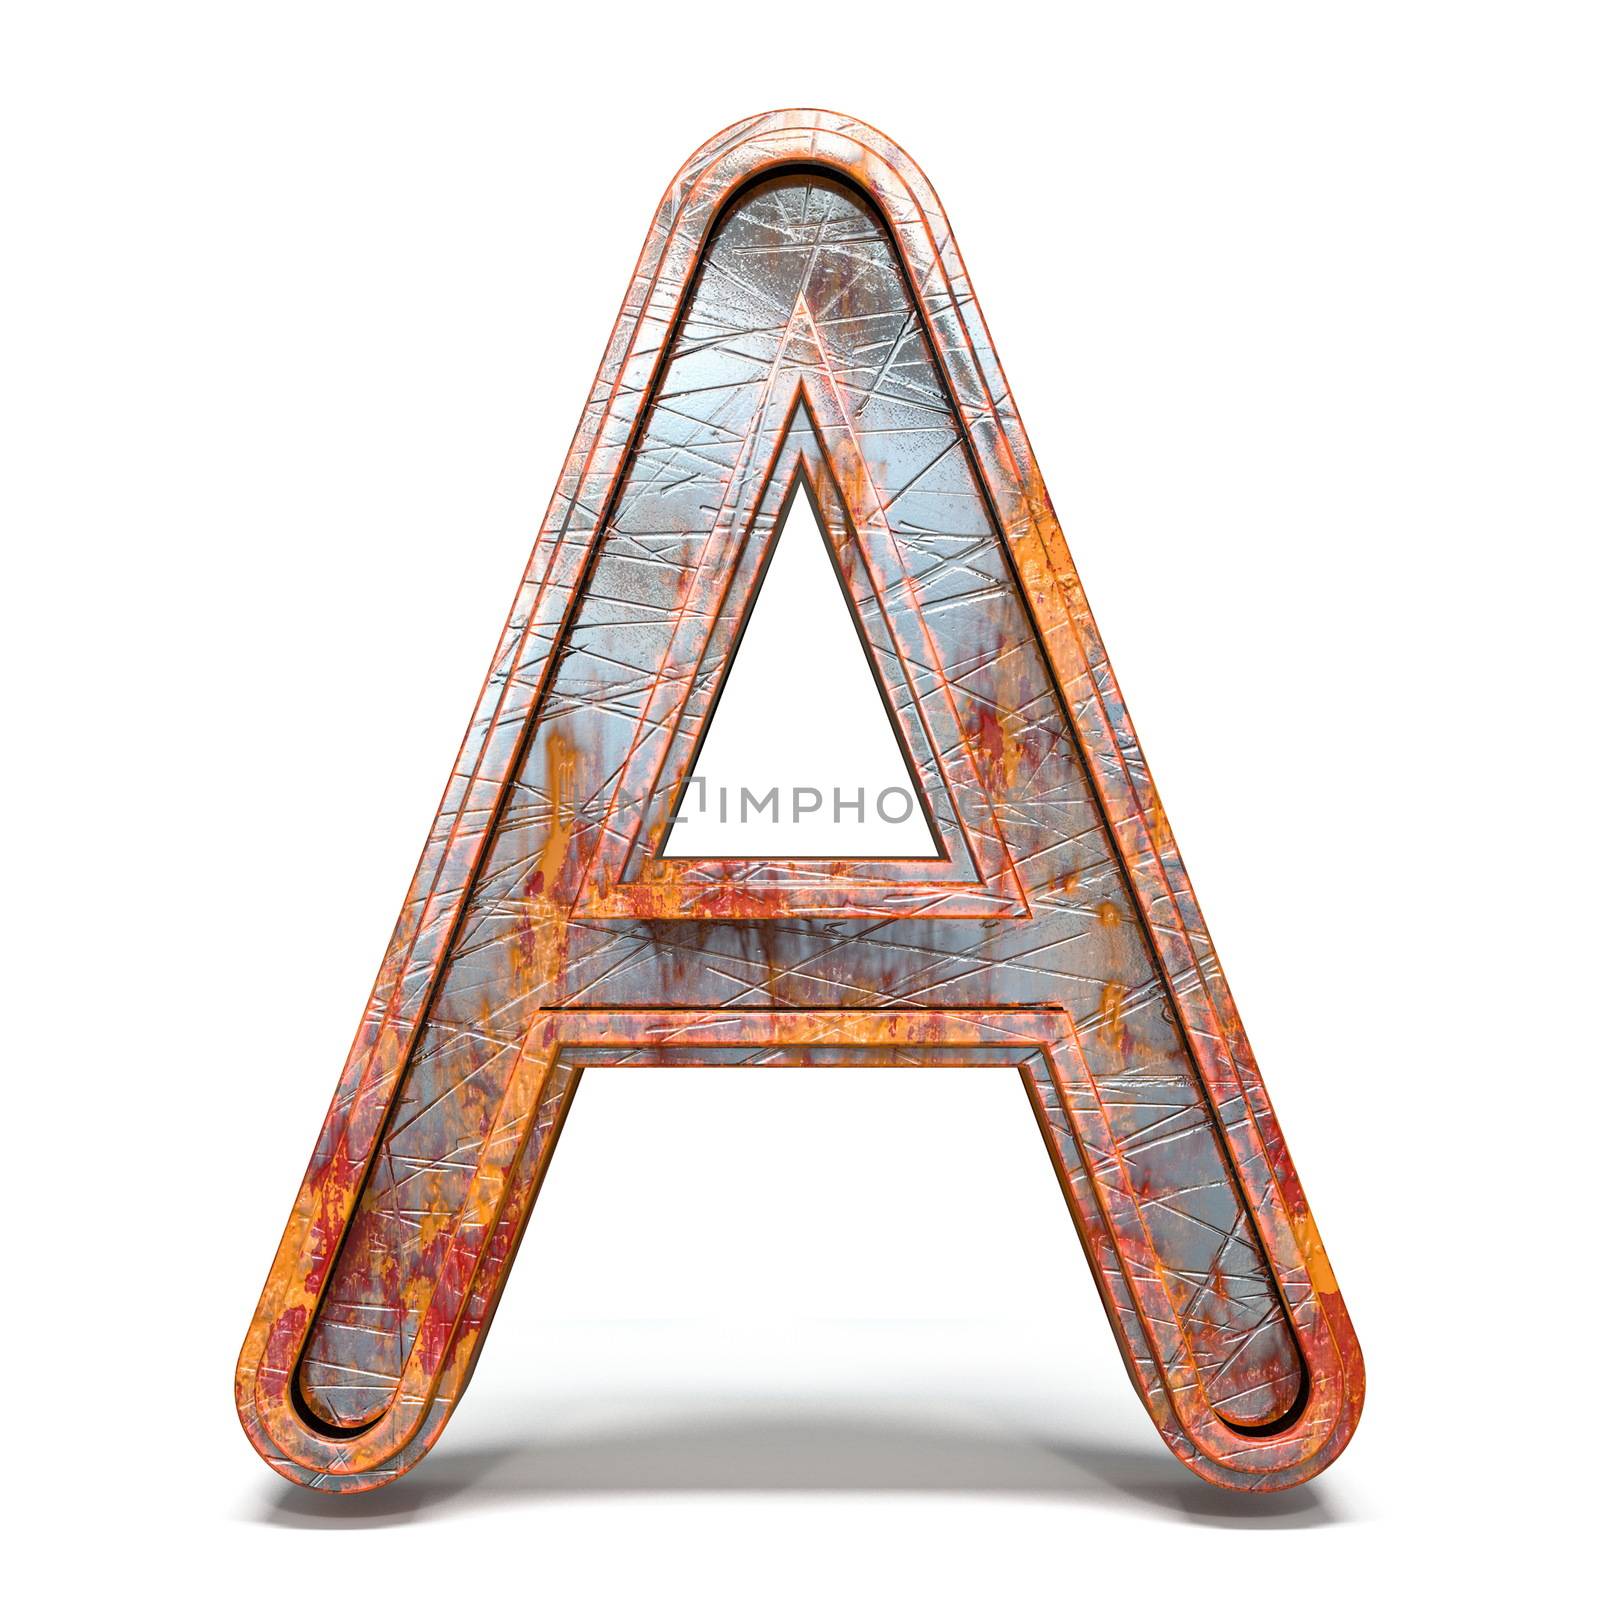 Rusty metal font Letter A 3D render illustration isolated on white background